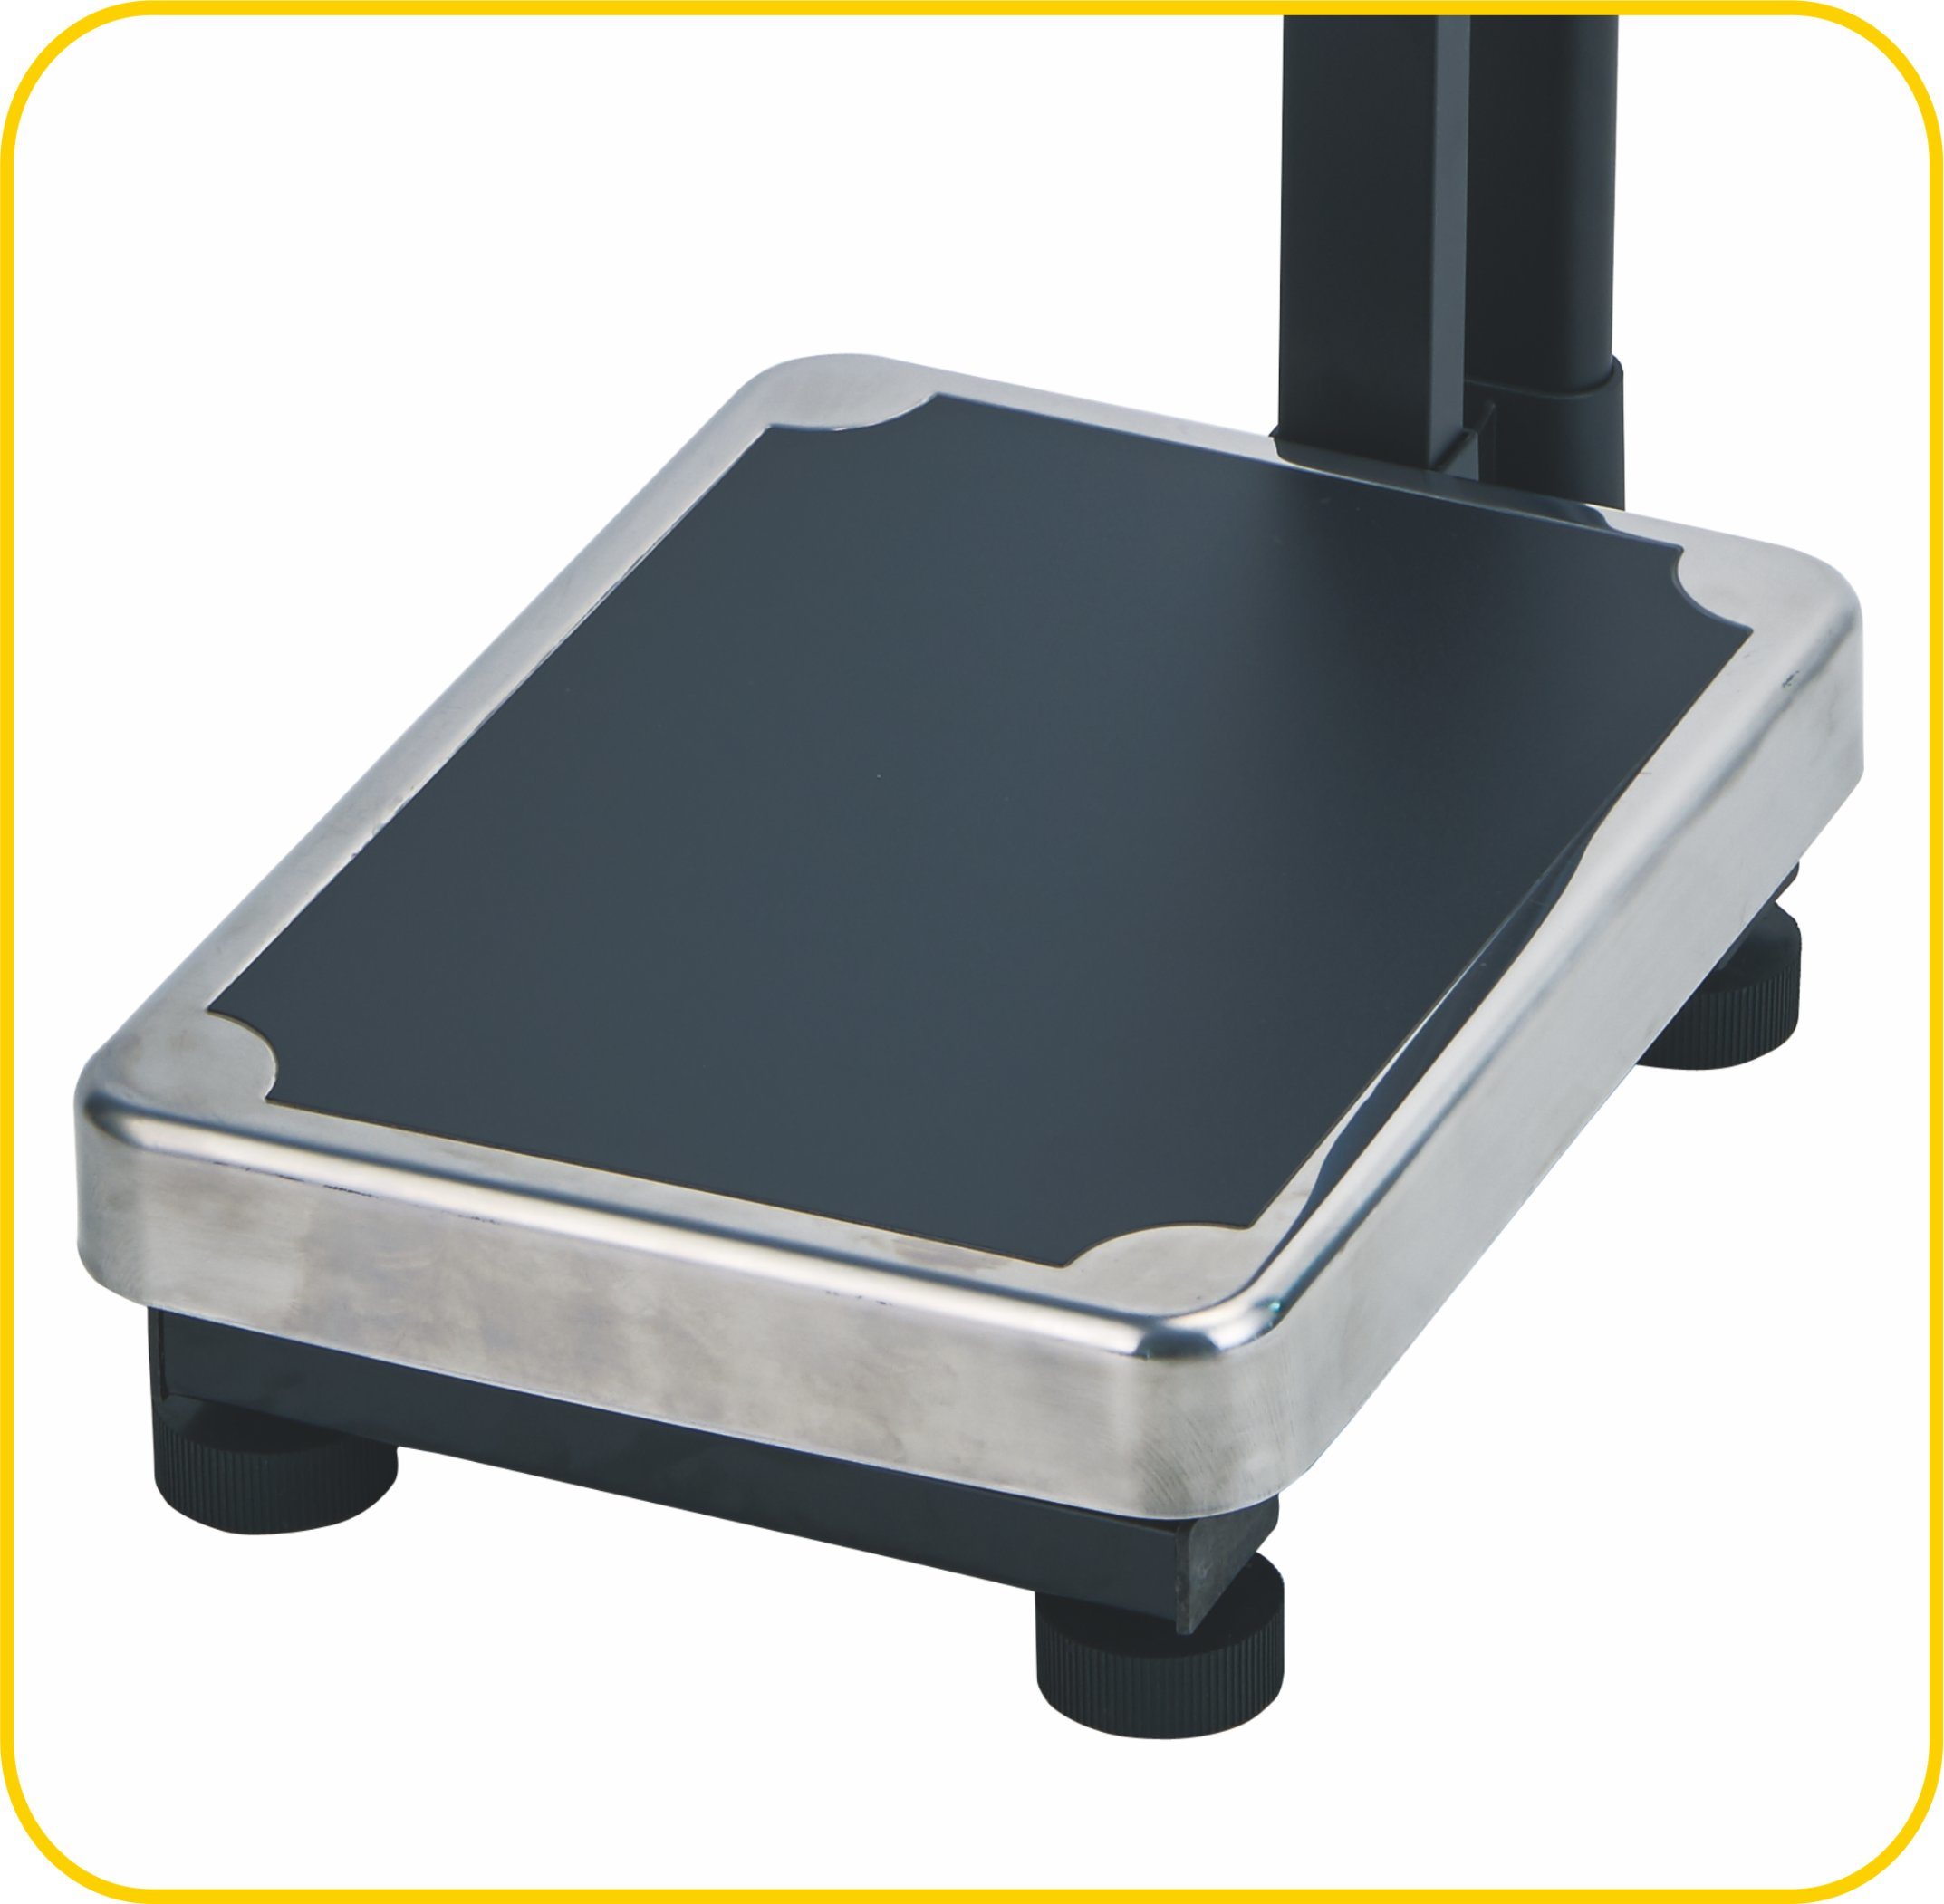 MS-A200B Platform Scales With Height Meter